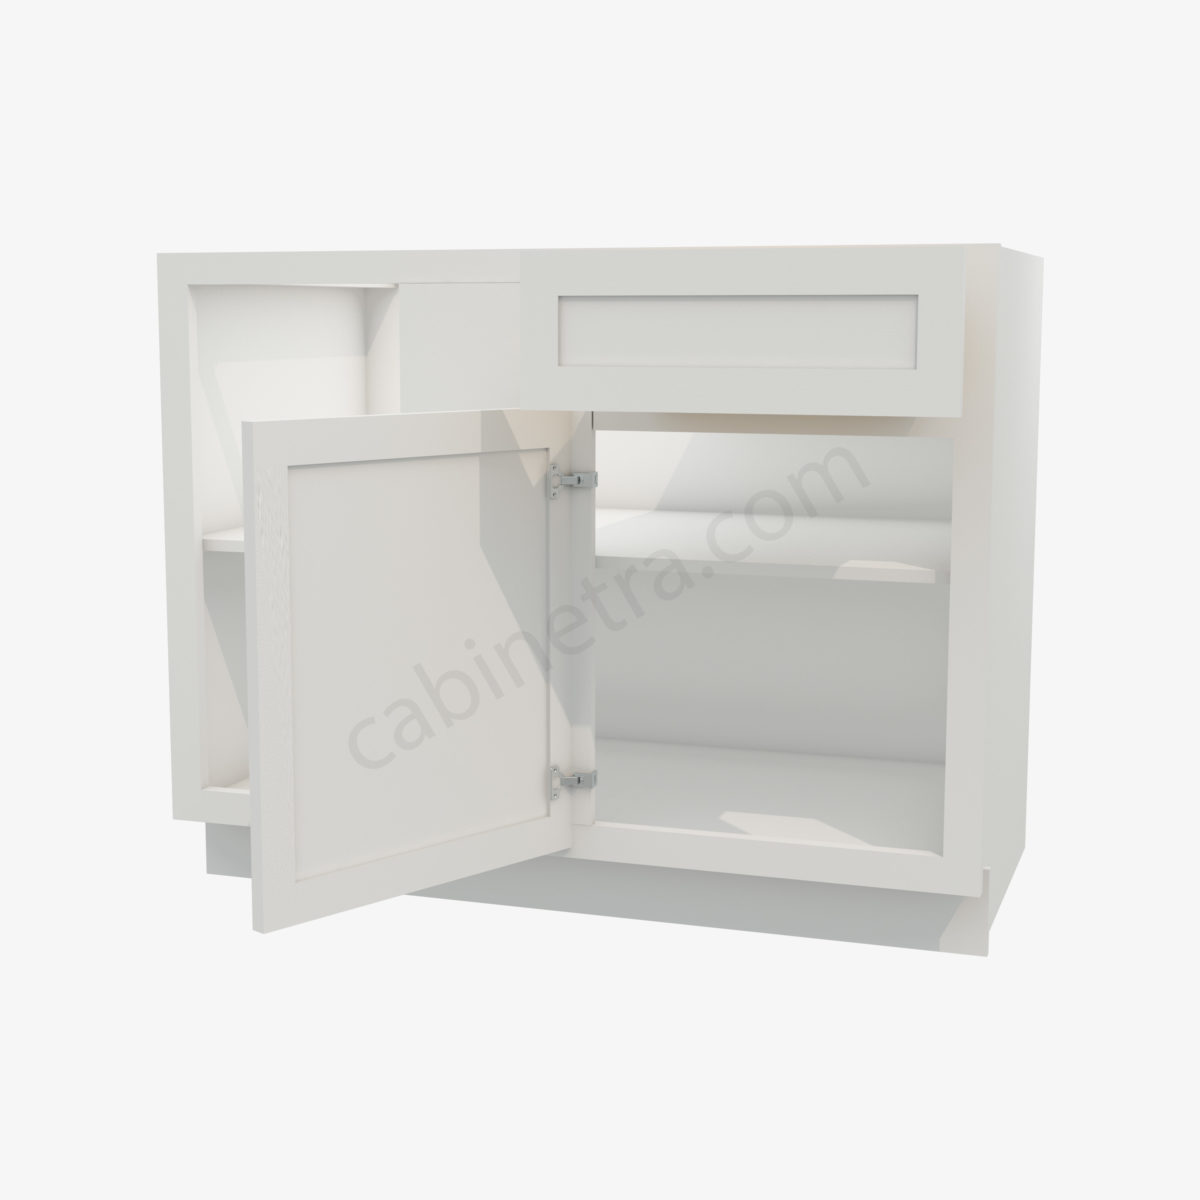 AW BBLC45 48 42W 5 Forevermark Ice White Shaker Cabinetra scaled